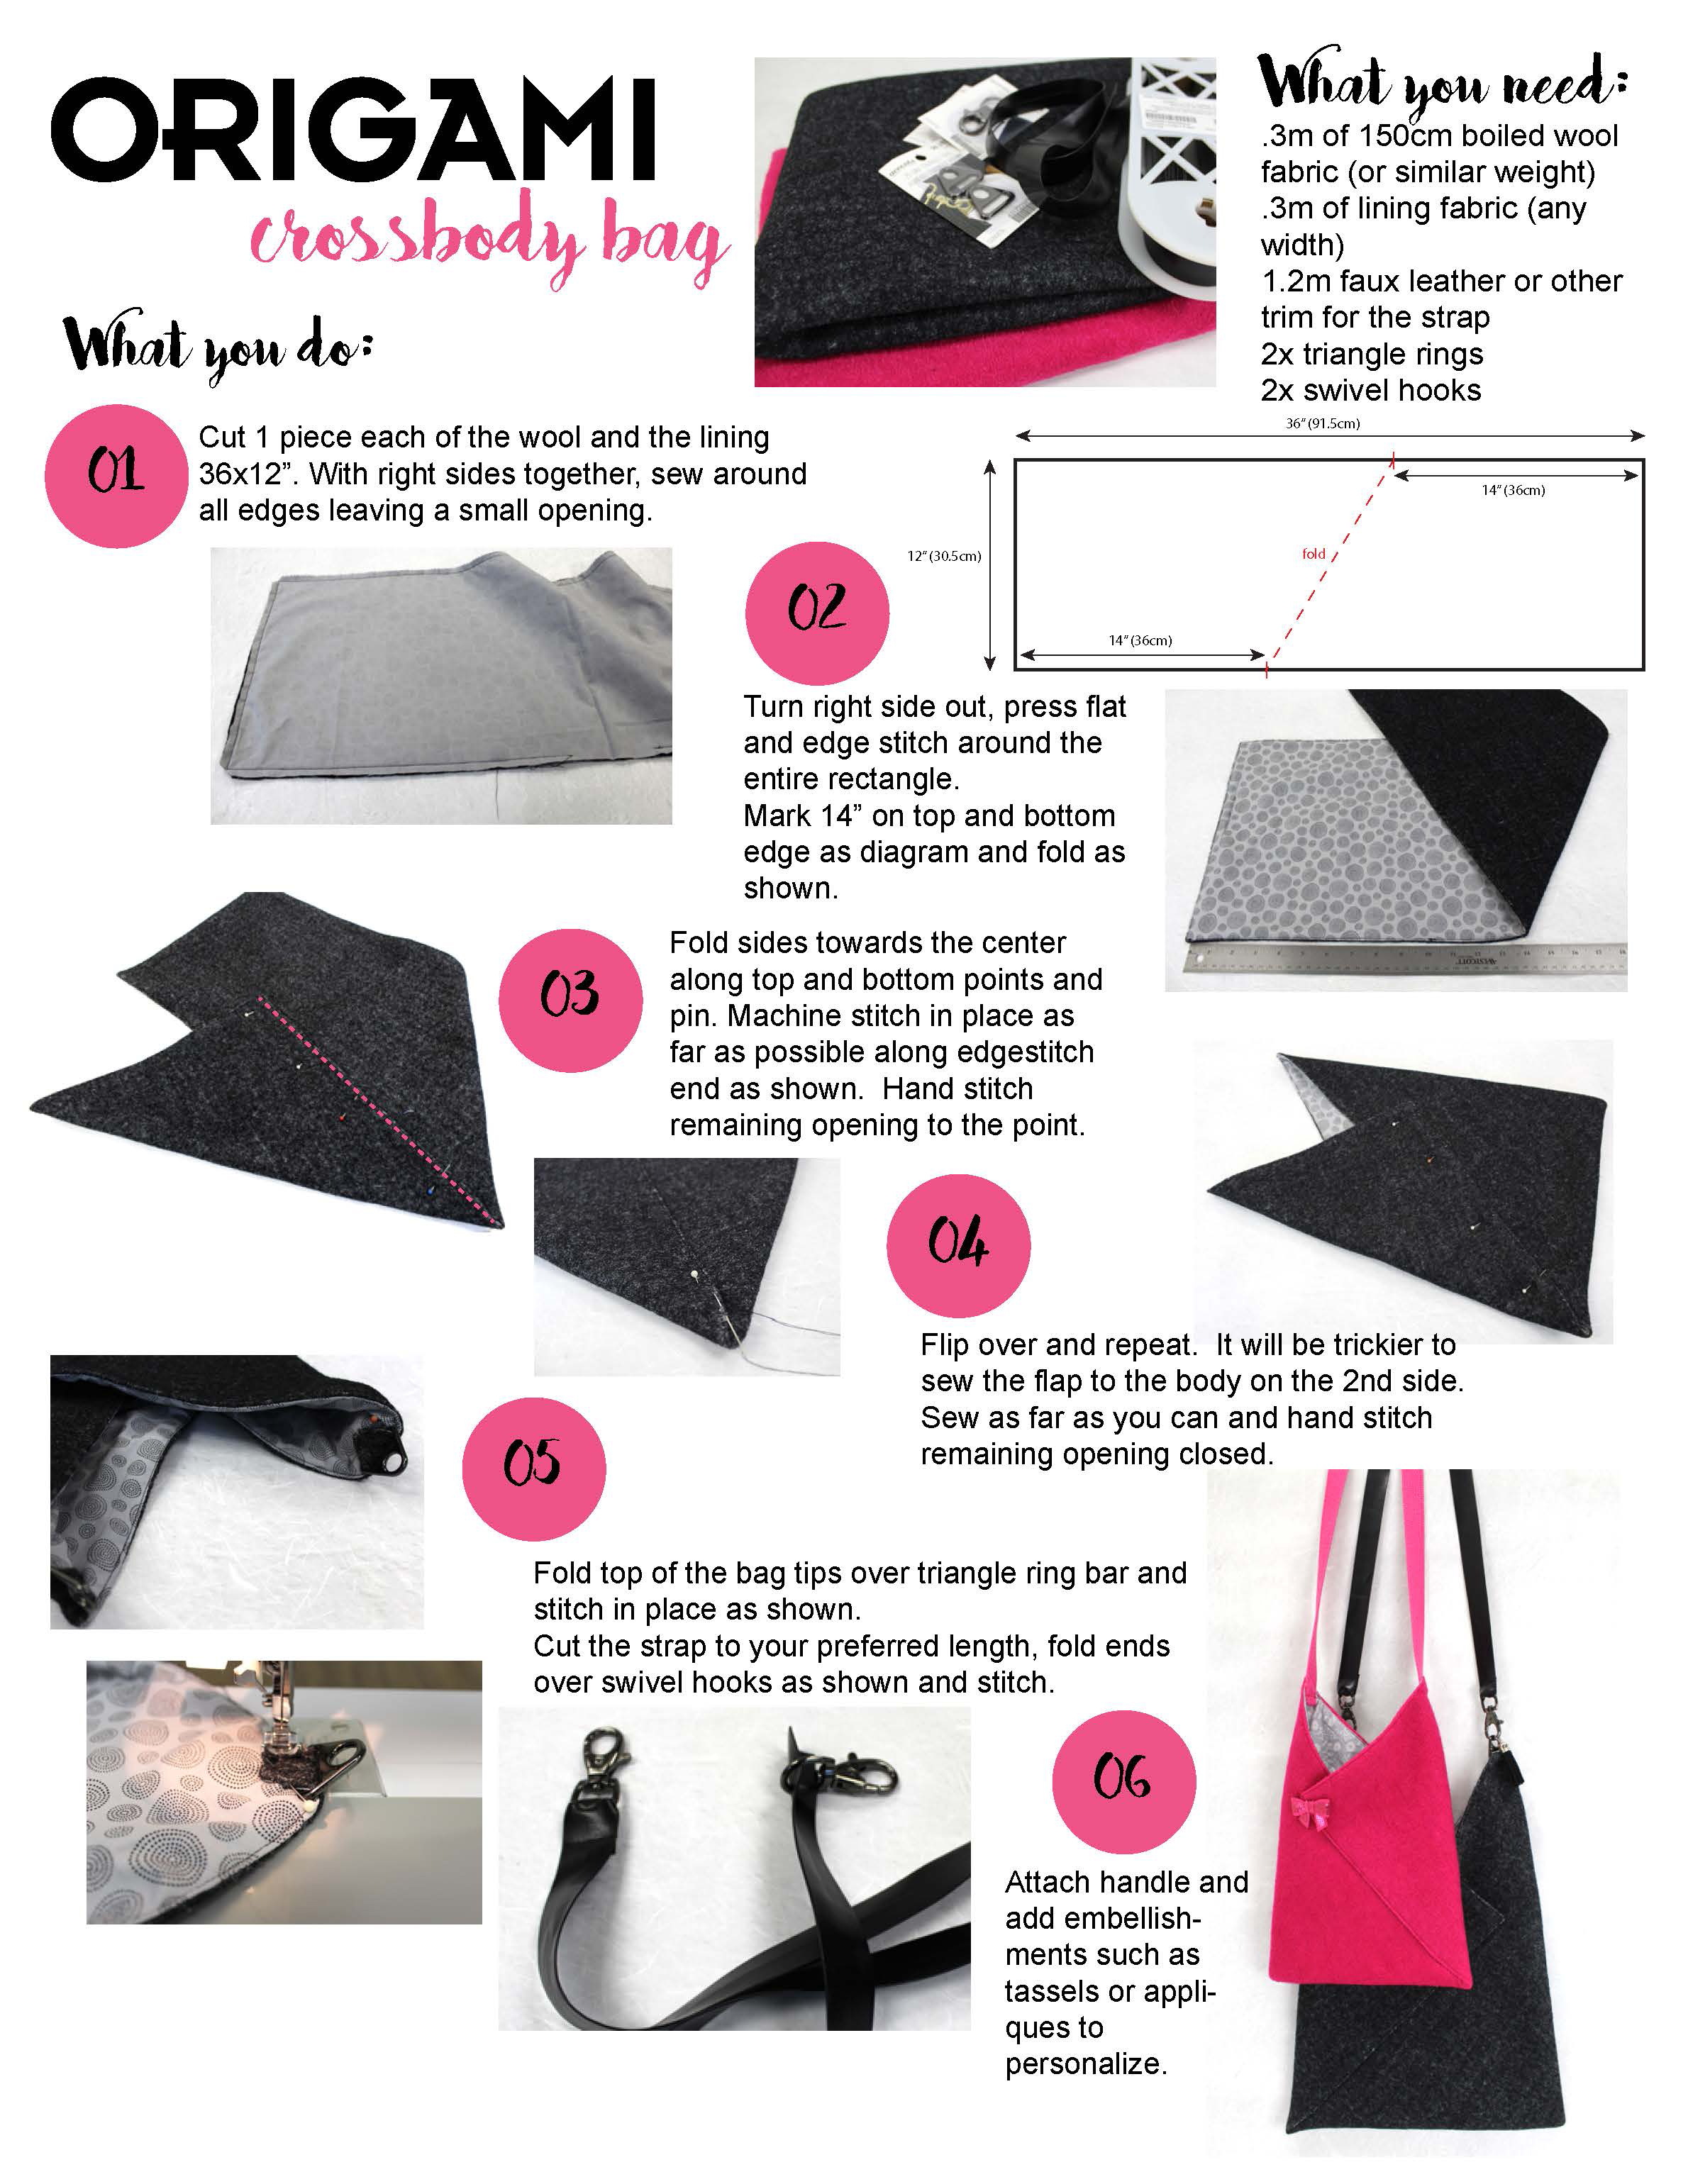 instruction on how to make origami crossbody bag